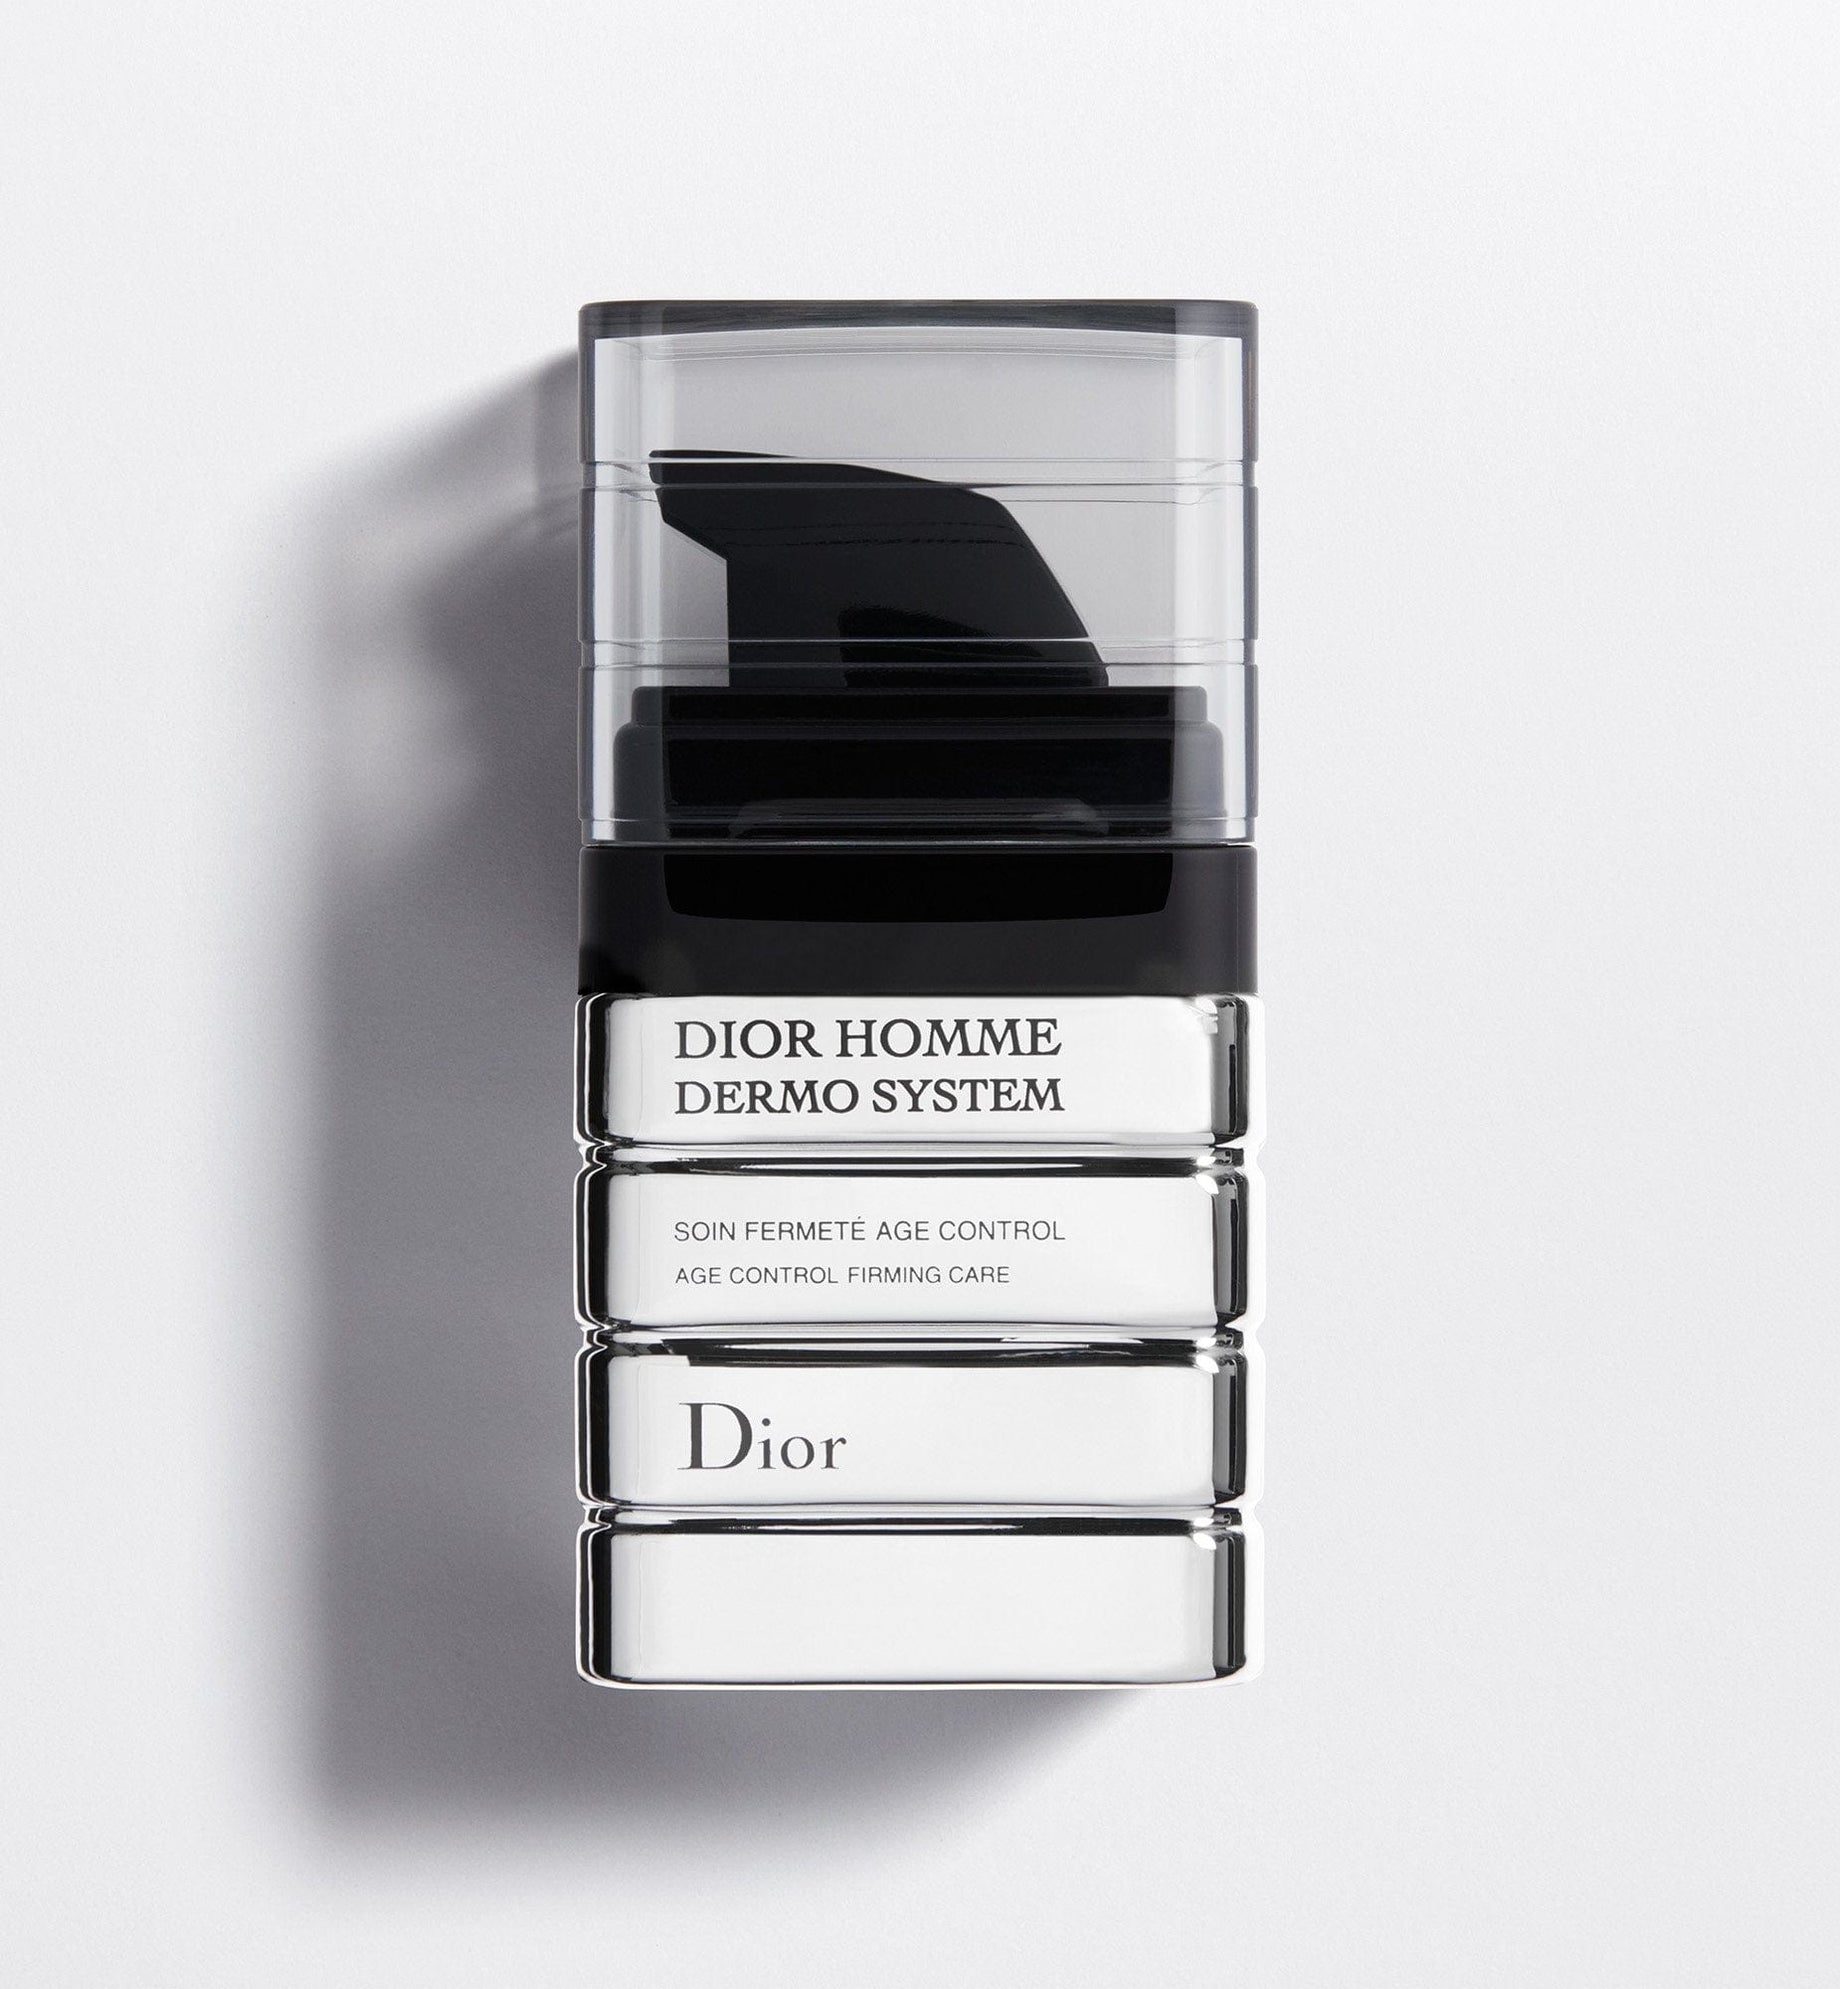 DIOR HOMME DERMO SYSTEM AGE CONTROL FIRMING CARE - BIO-FERMENTED INGREDIENT & VITAMIN E PHOSPHATE